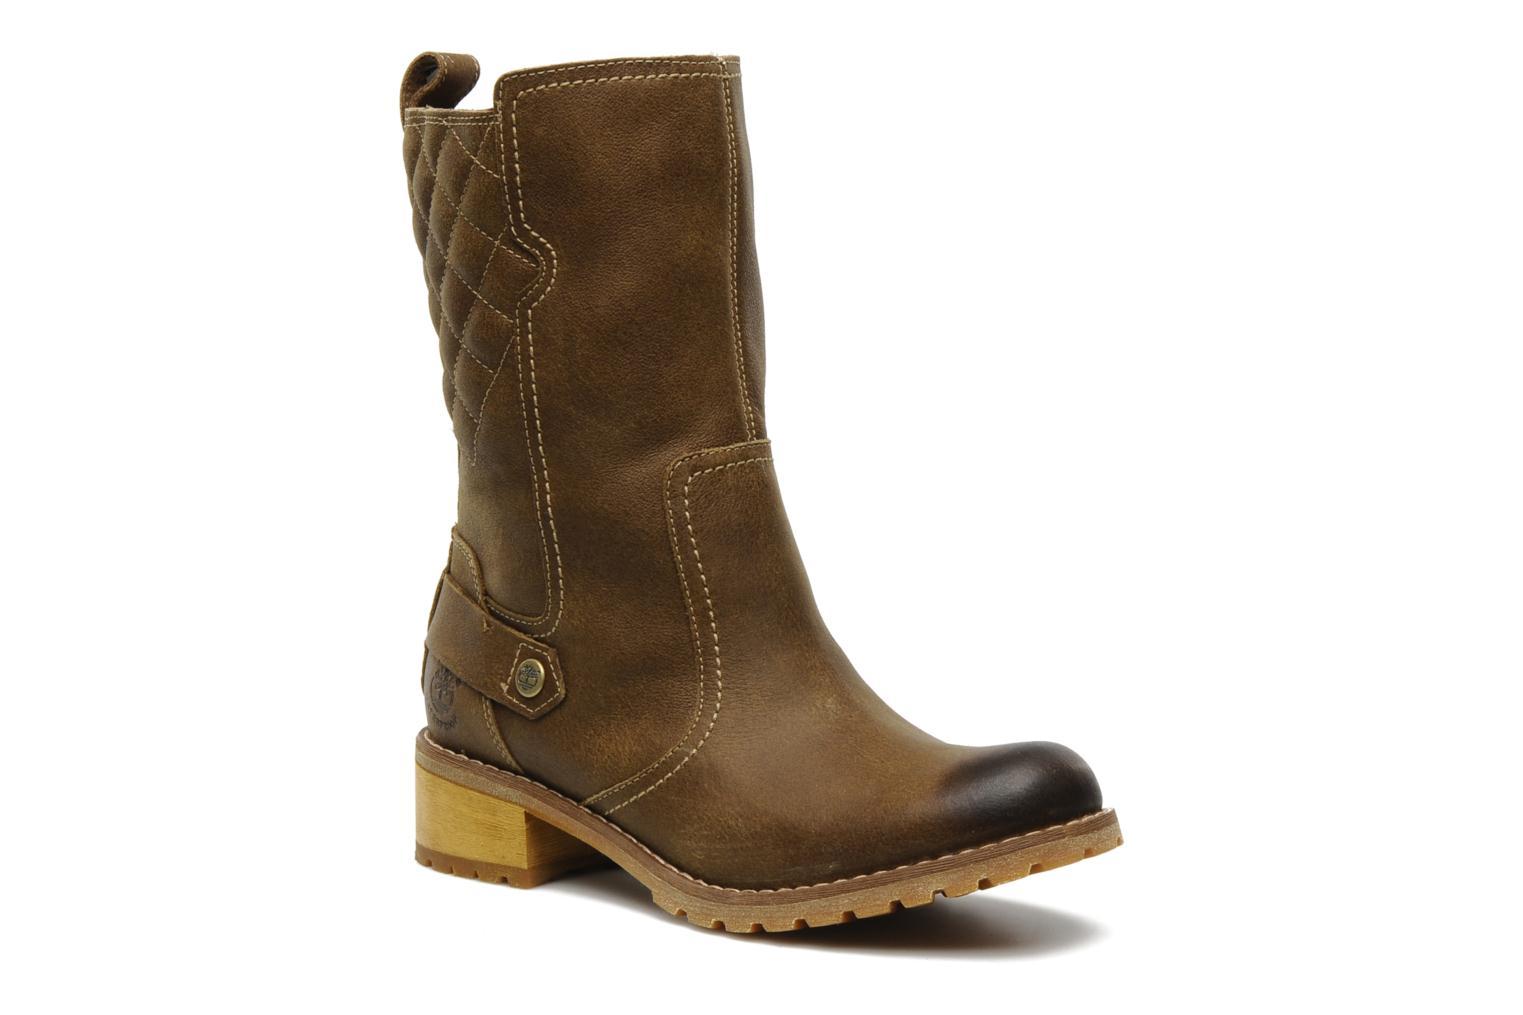 Foto Boots y Botines Timberland Earthkeepers Apley Mid WP Boot Mujer foto 54577